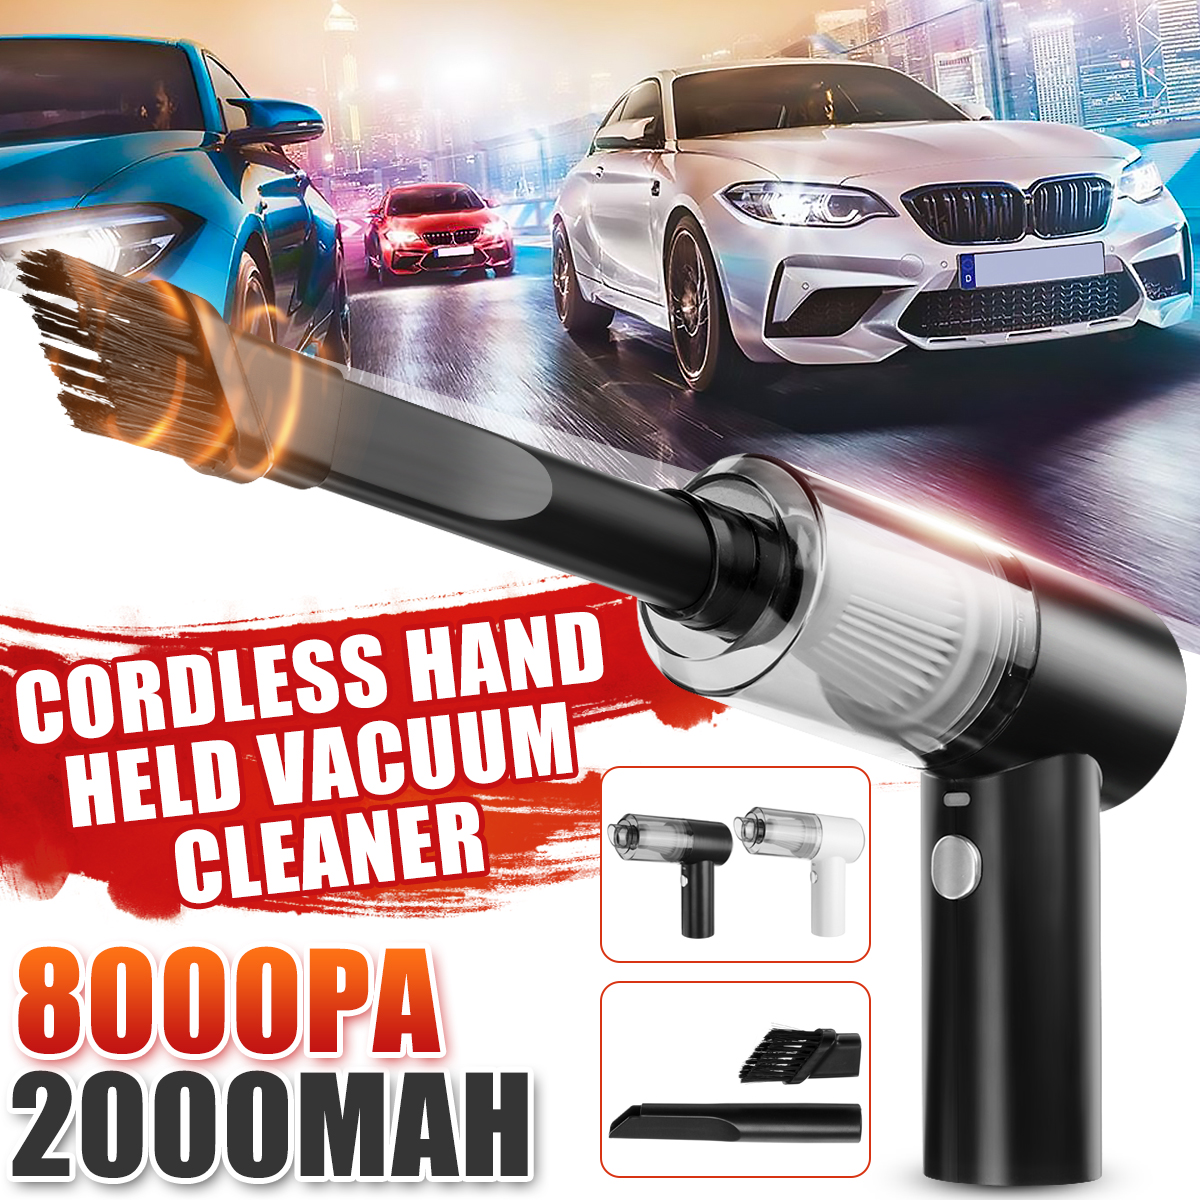 120W-Cordless-HandHeld-Vacuum-Cleaner-Mini-Portable-Dust-Cleaner-for-Car-Office-Home-8000Pa-1830652-2